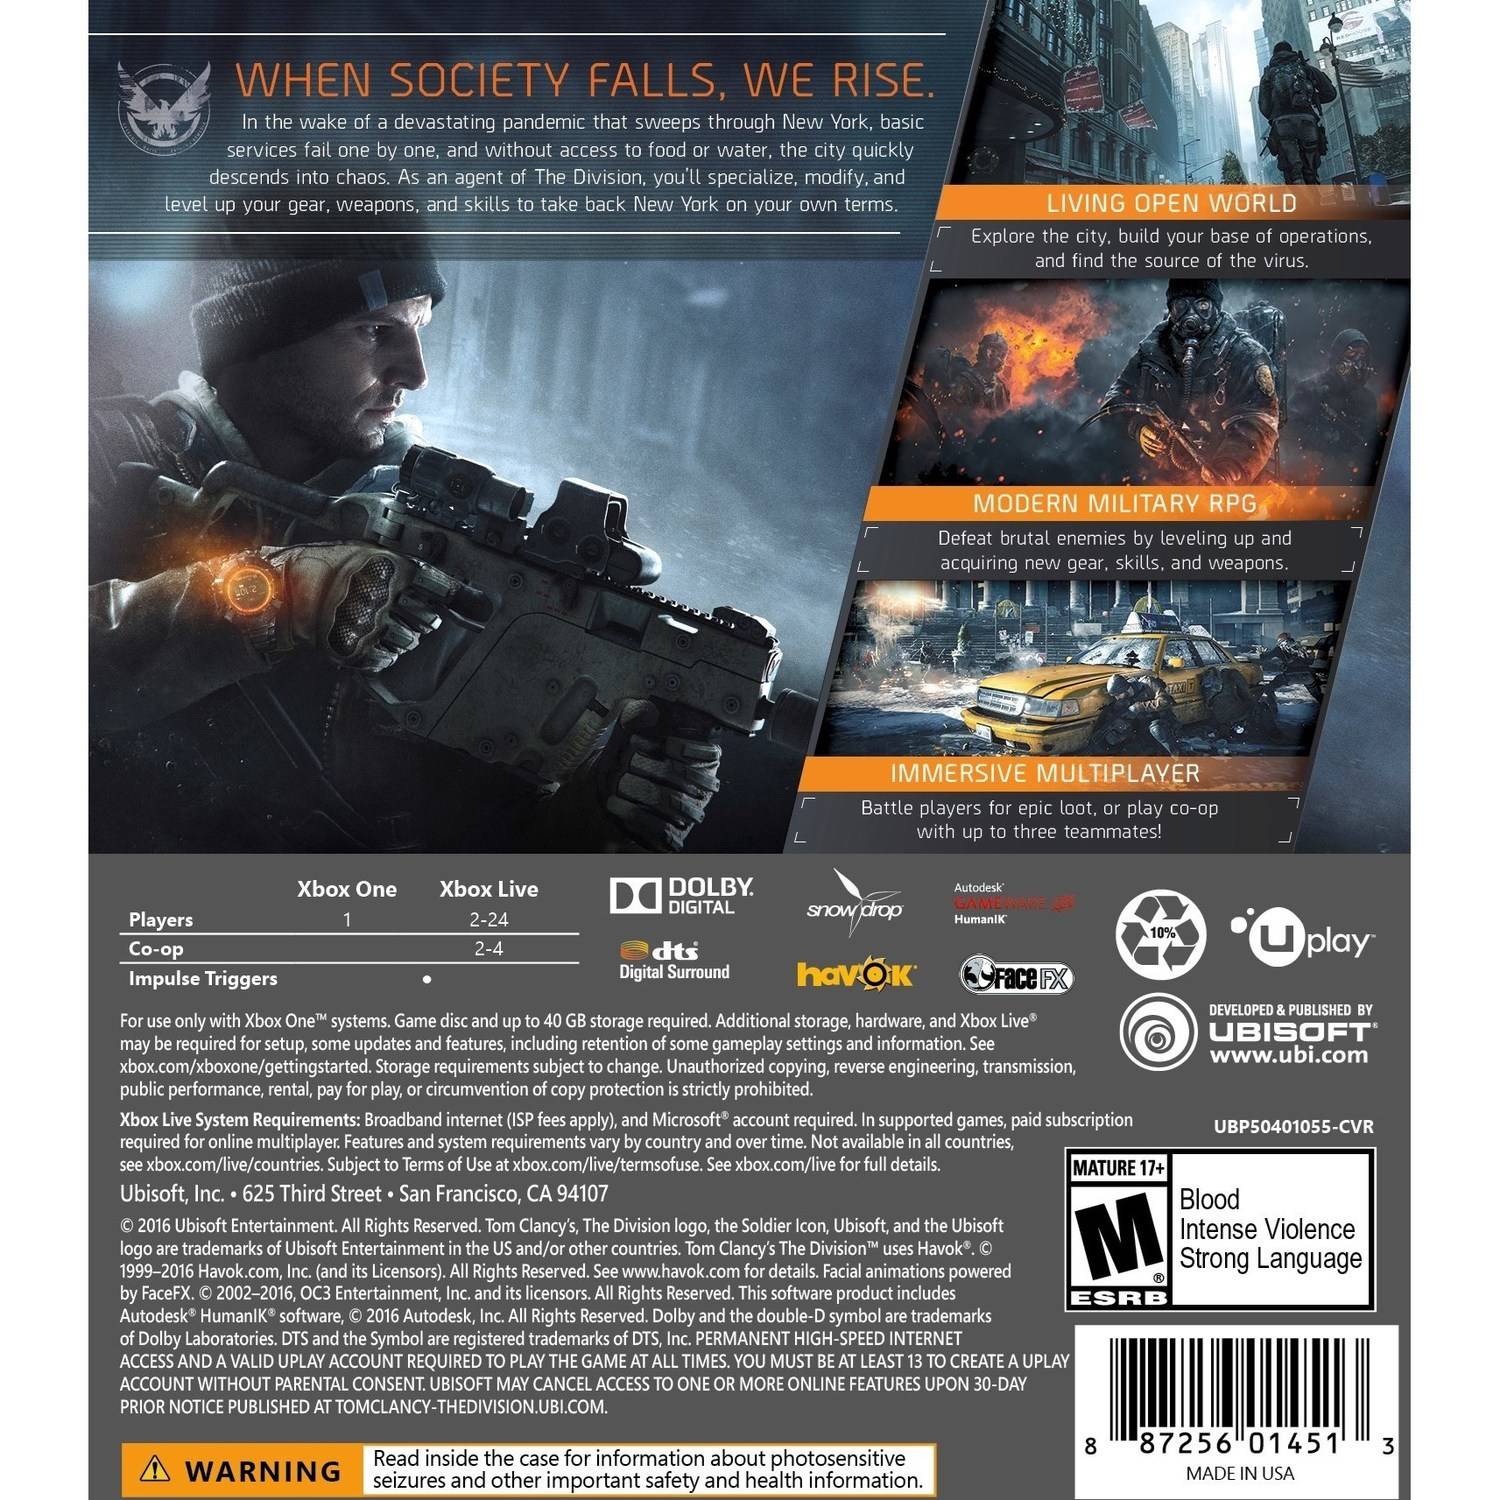 Tom Clancy's: The Division, Ubisoft, Xbox One, 887256014513 - image 2 of 7